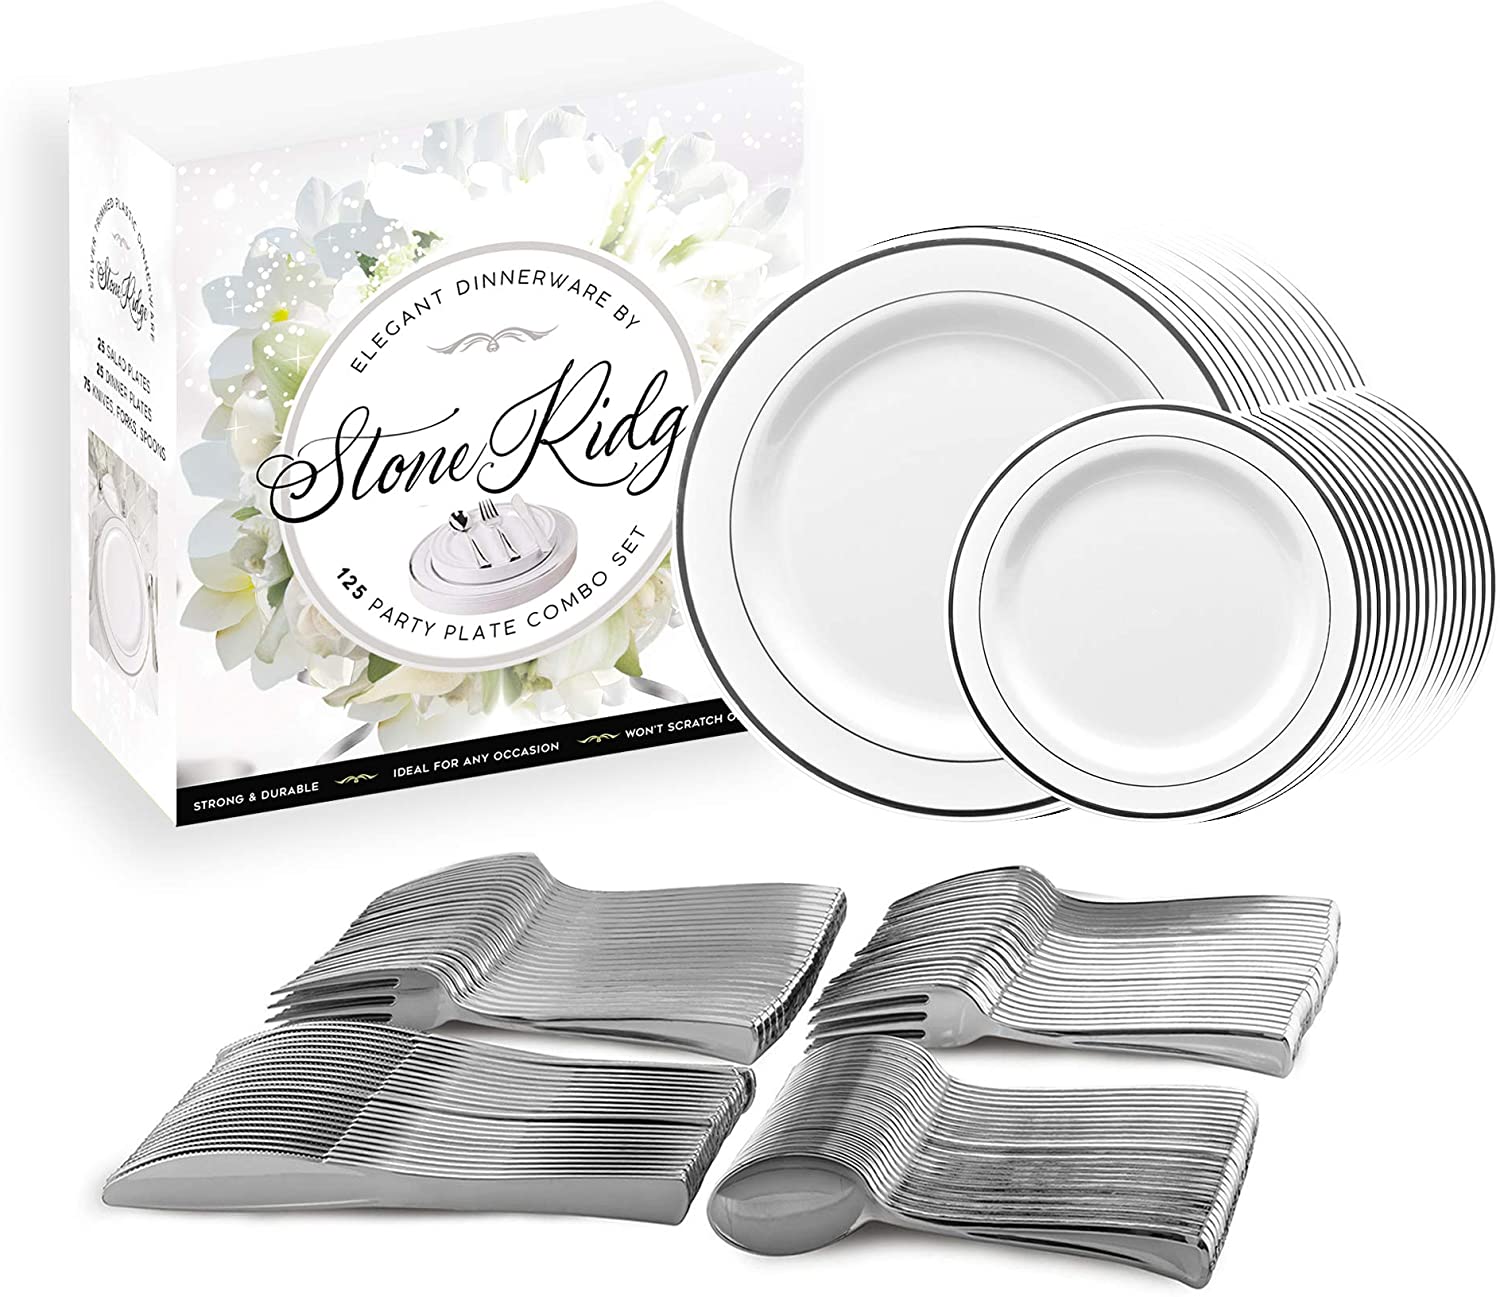 50 Classy Disposable Plastic Plates White Plates, Silver Trim, includes forks, knifes & spoons